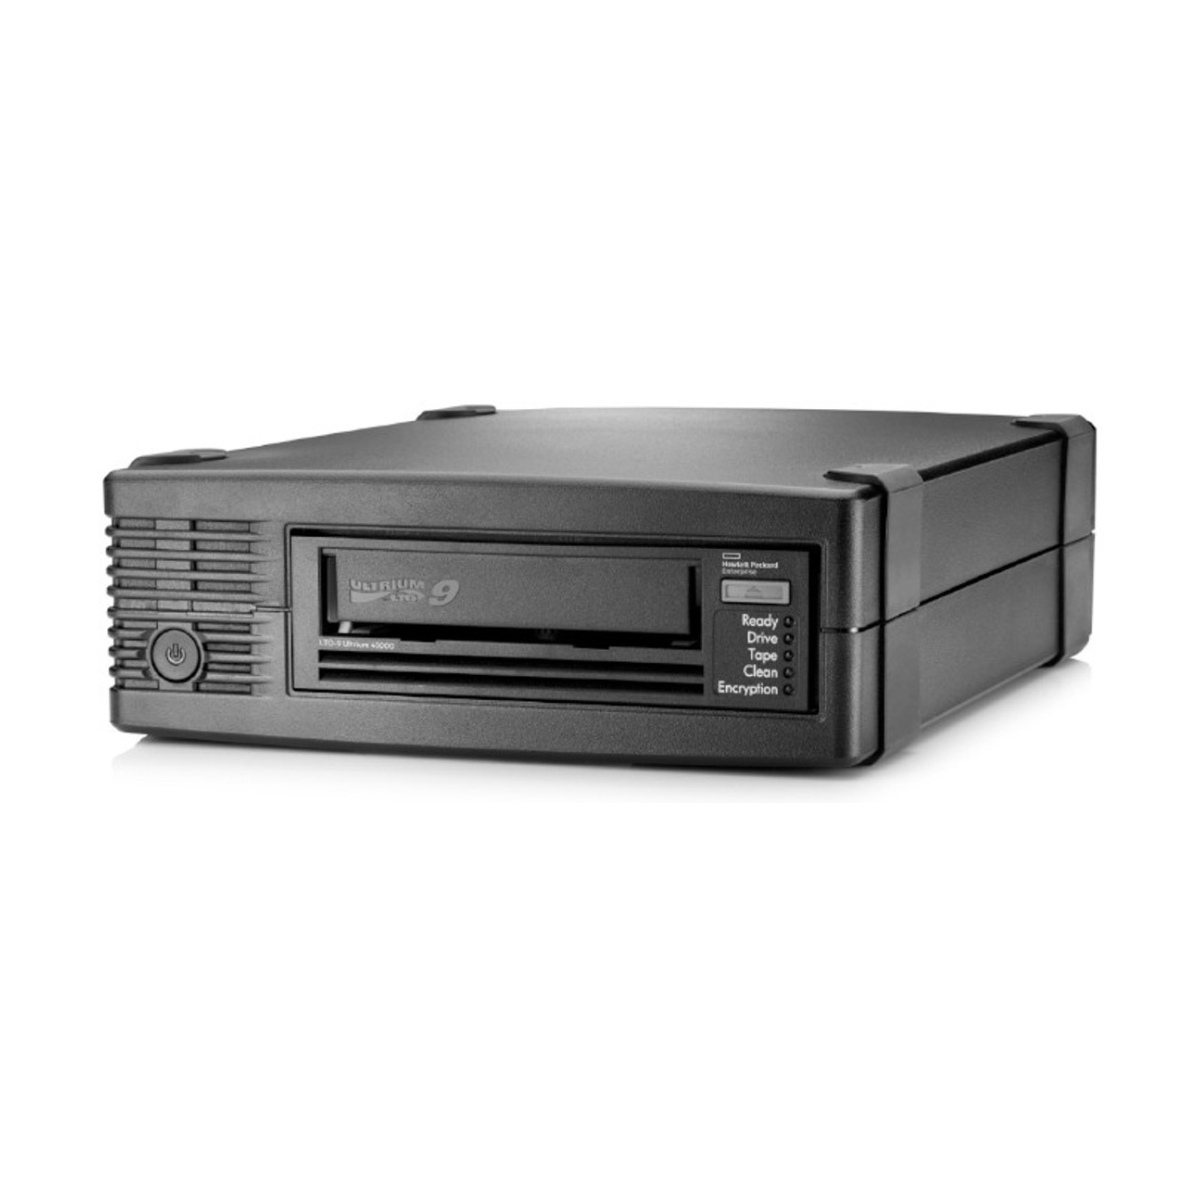 Tape Drive HPE LTO 9 External - BC042A